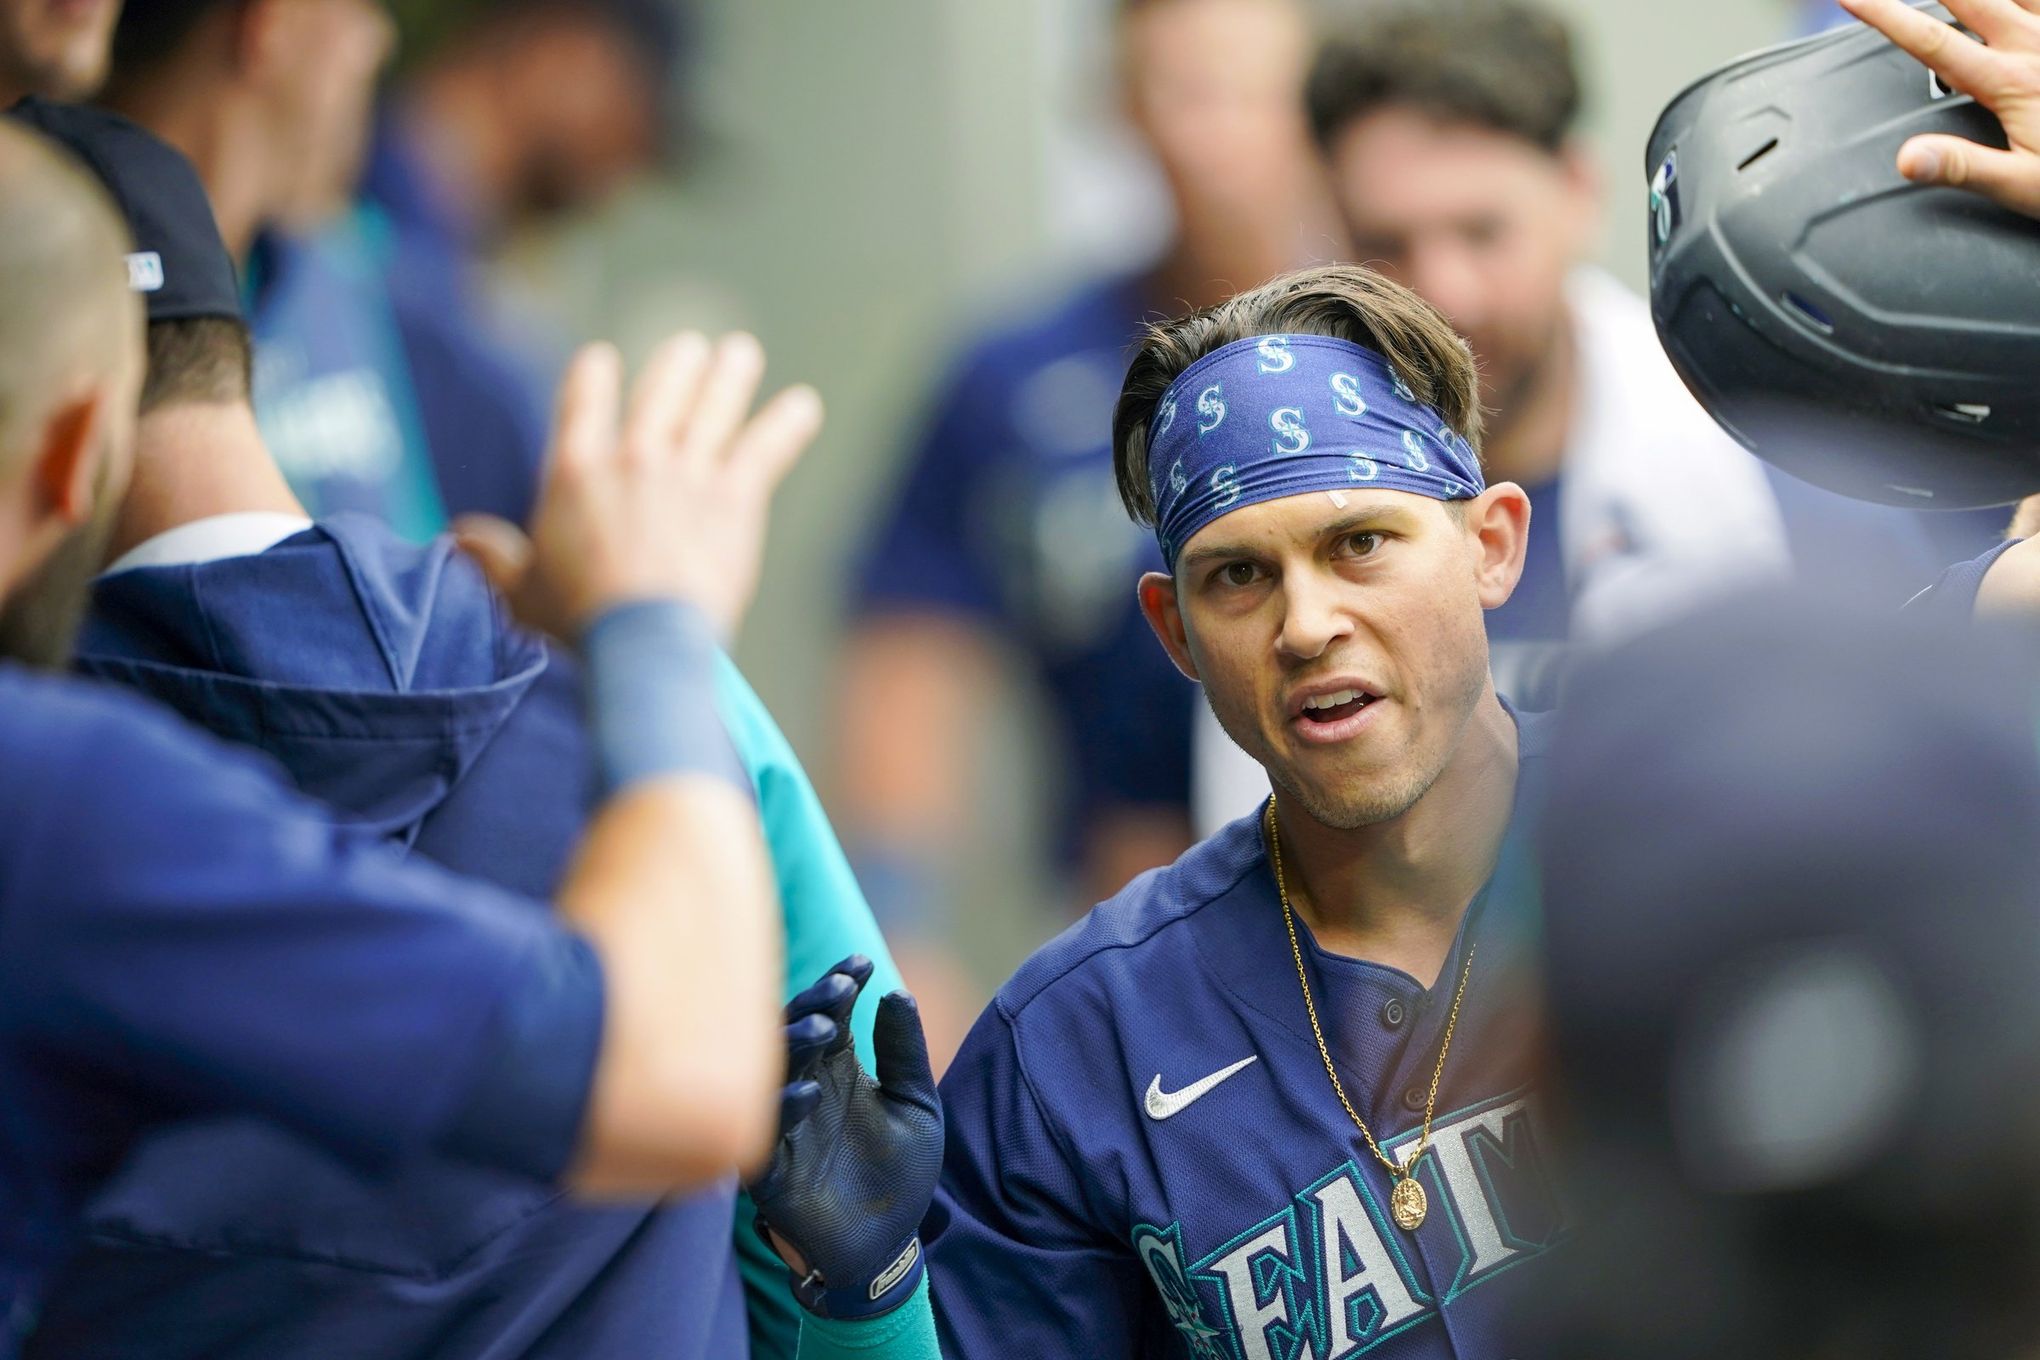 Servais says baseball doesn't work like Costco: 'You can't win